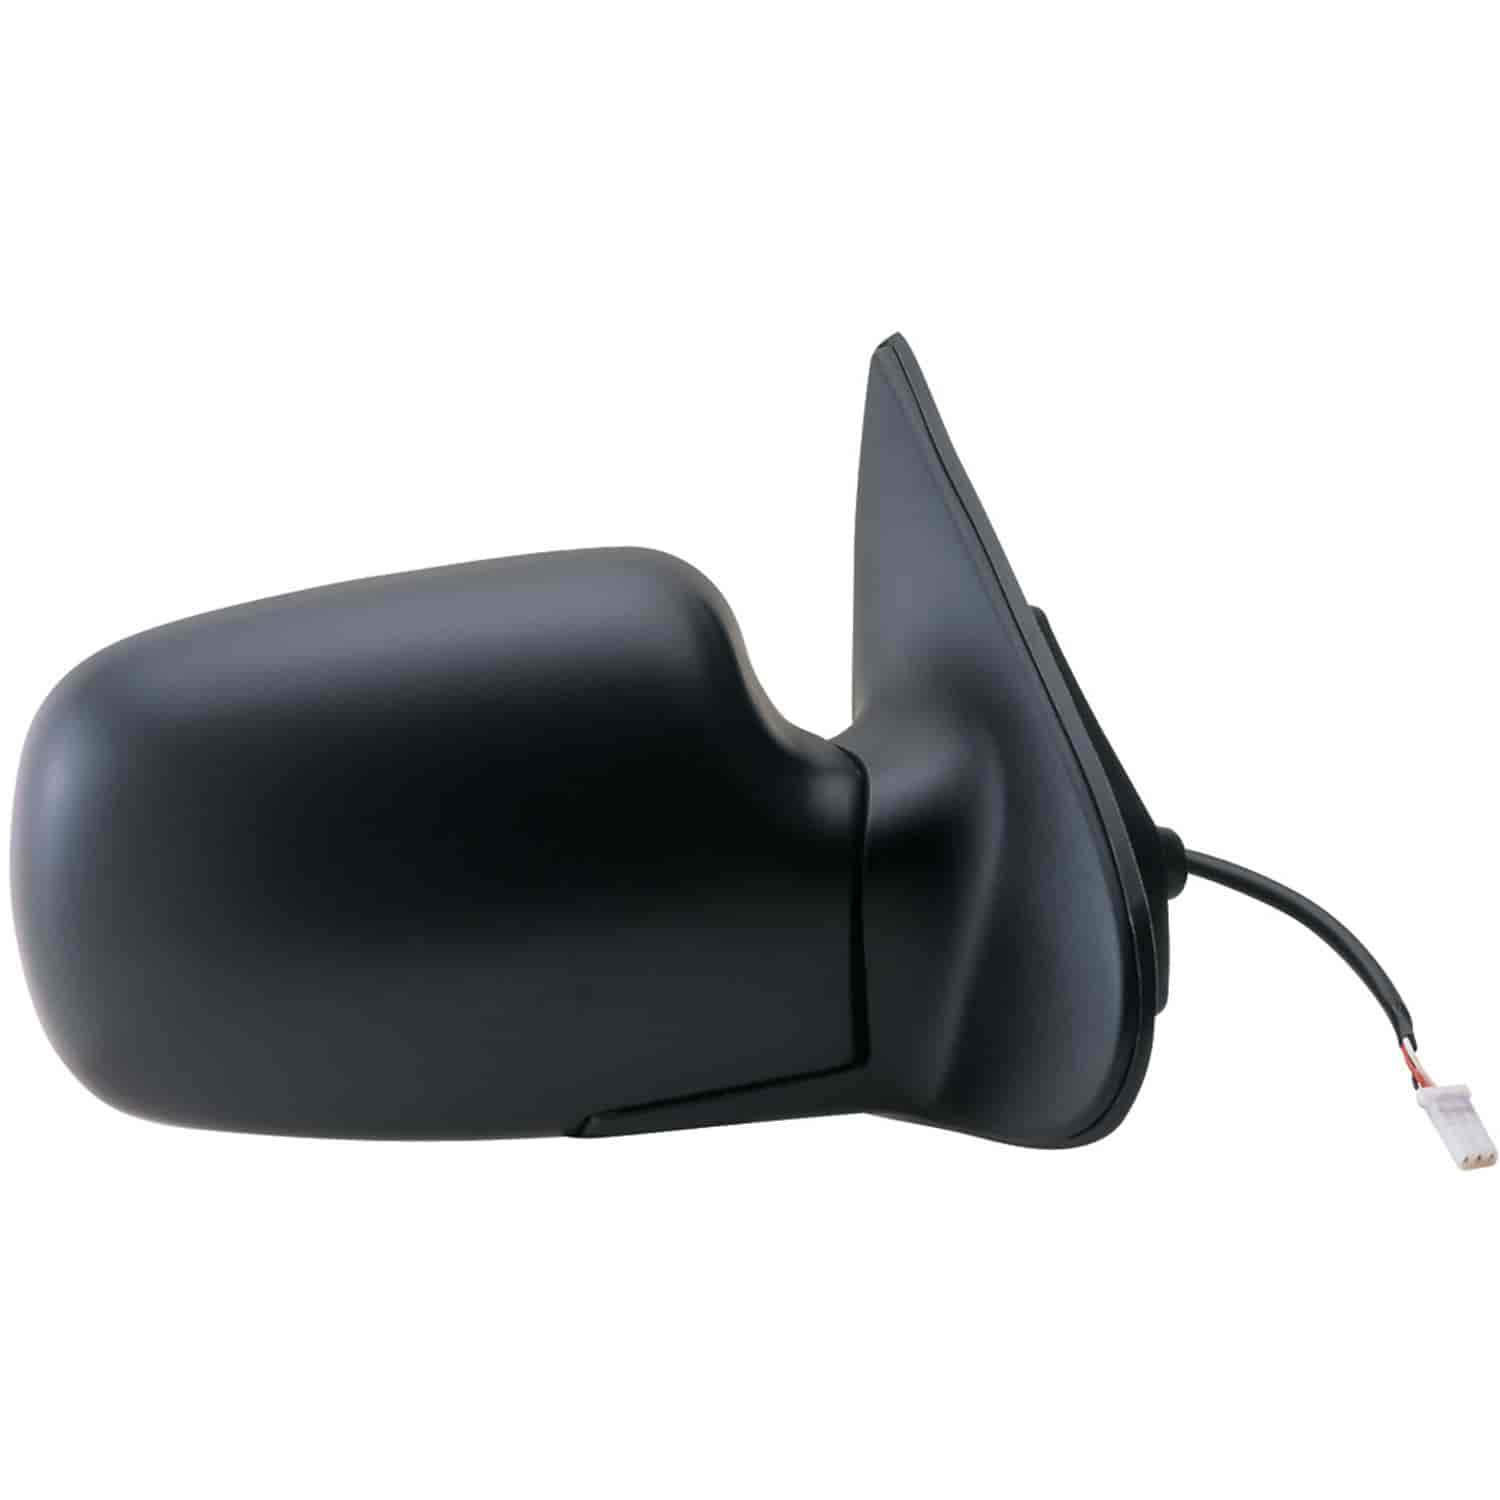 OEM Style Replacement mirror for 93-95 Mercury Villager;